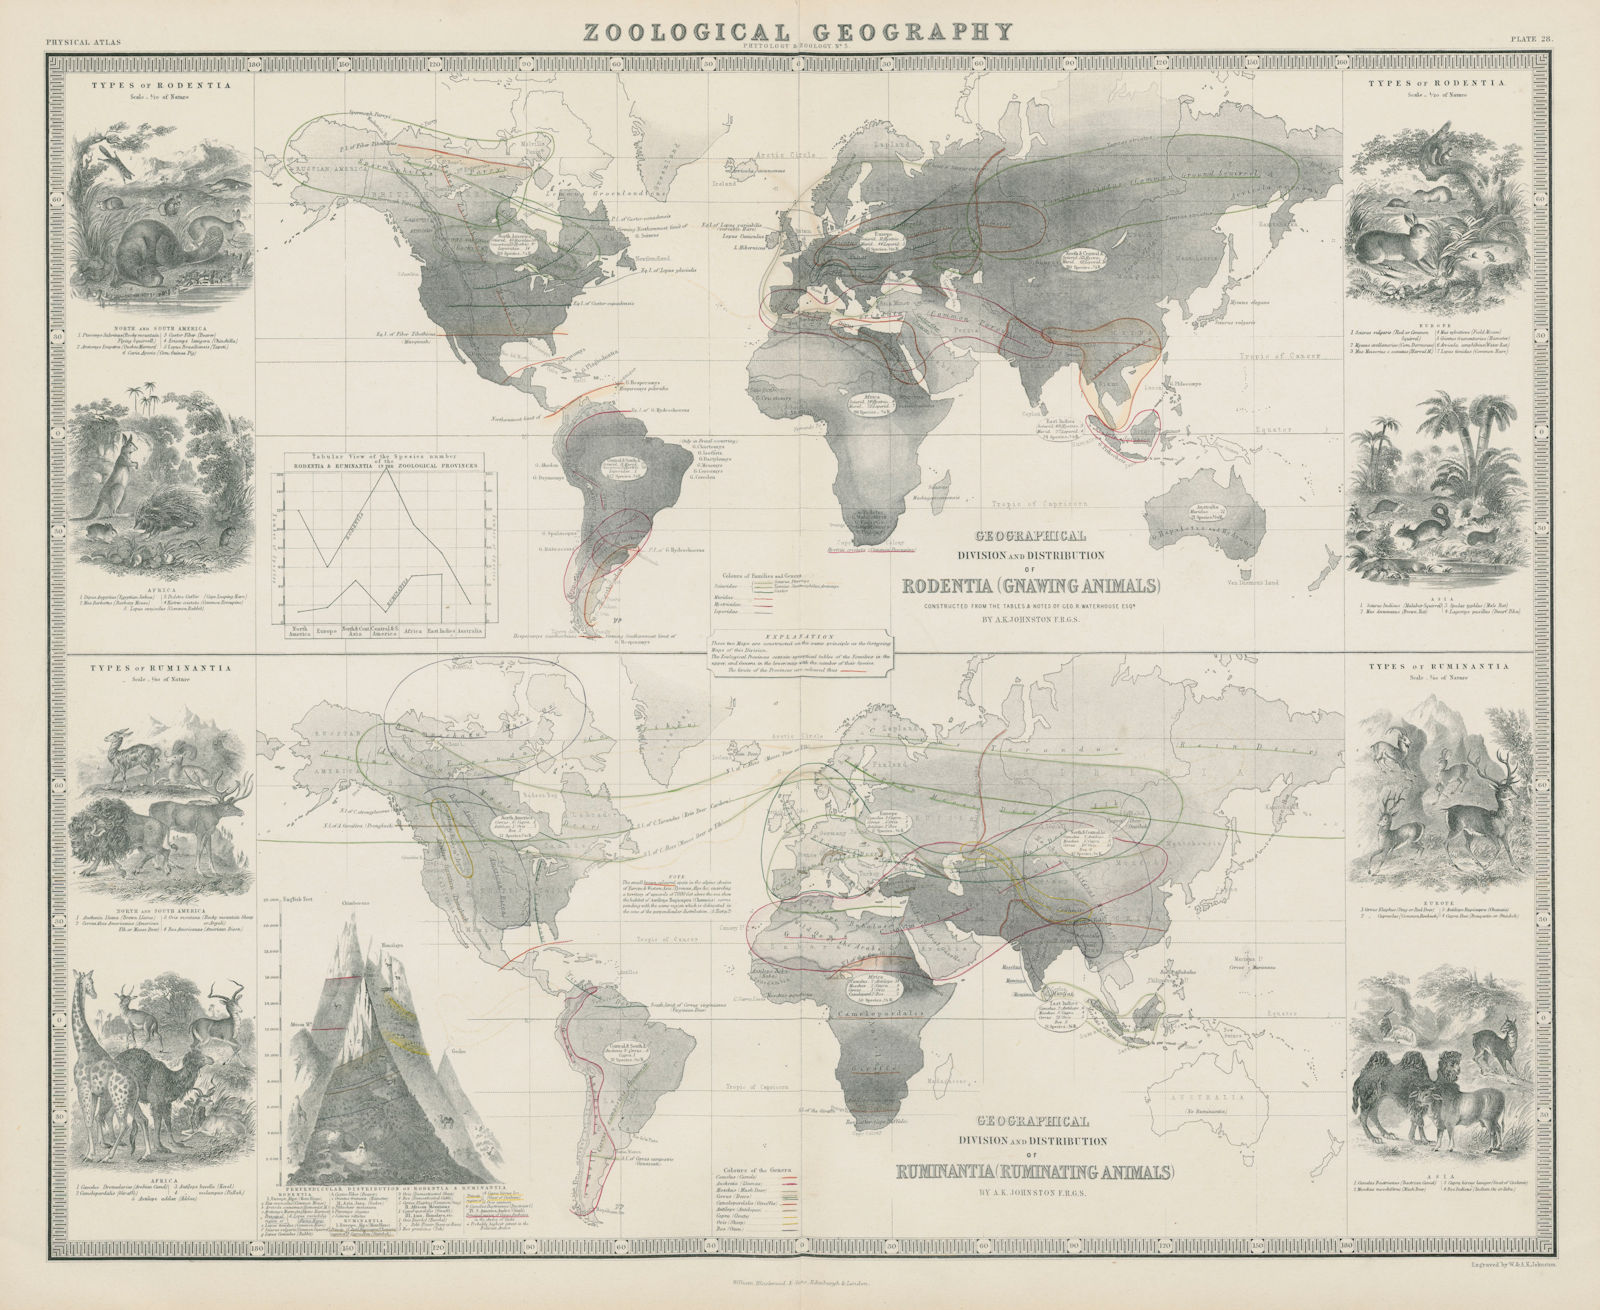 Associate Product Zoological Geography. Rodentia & Ruminantia distribution 1856 old antique map